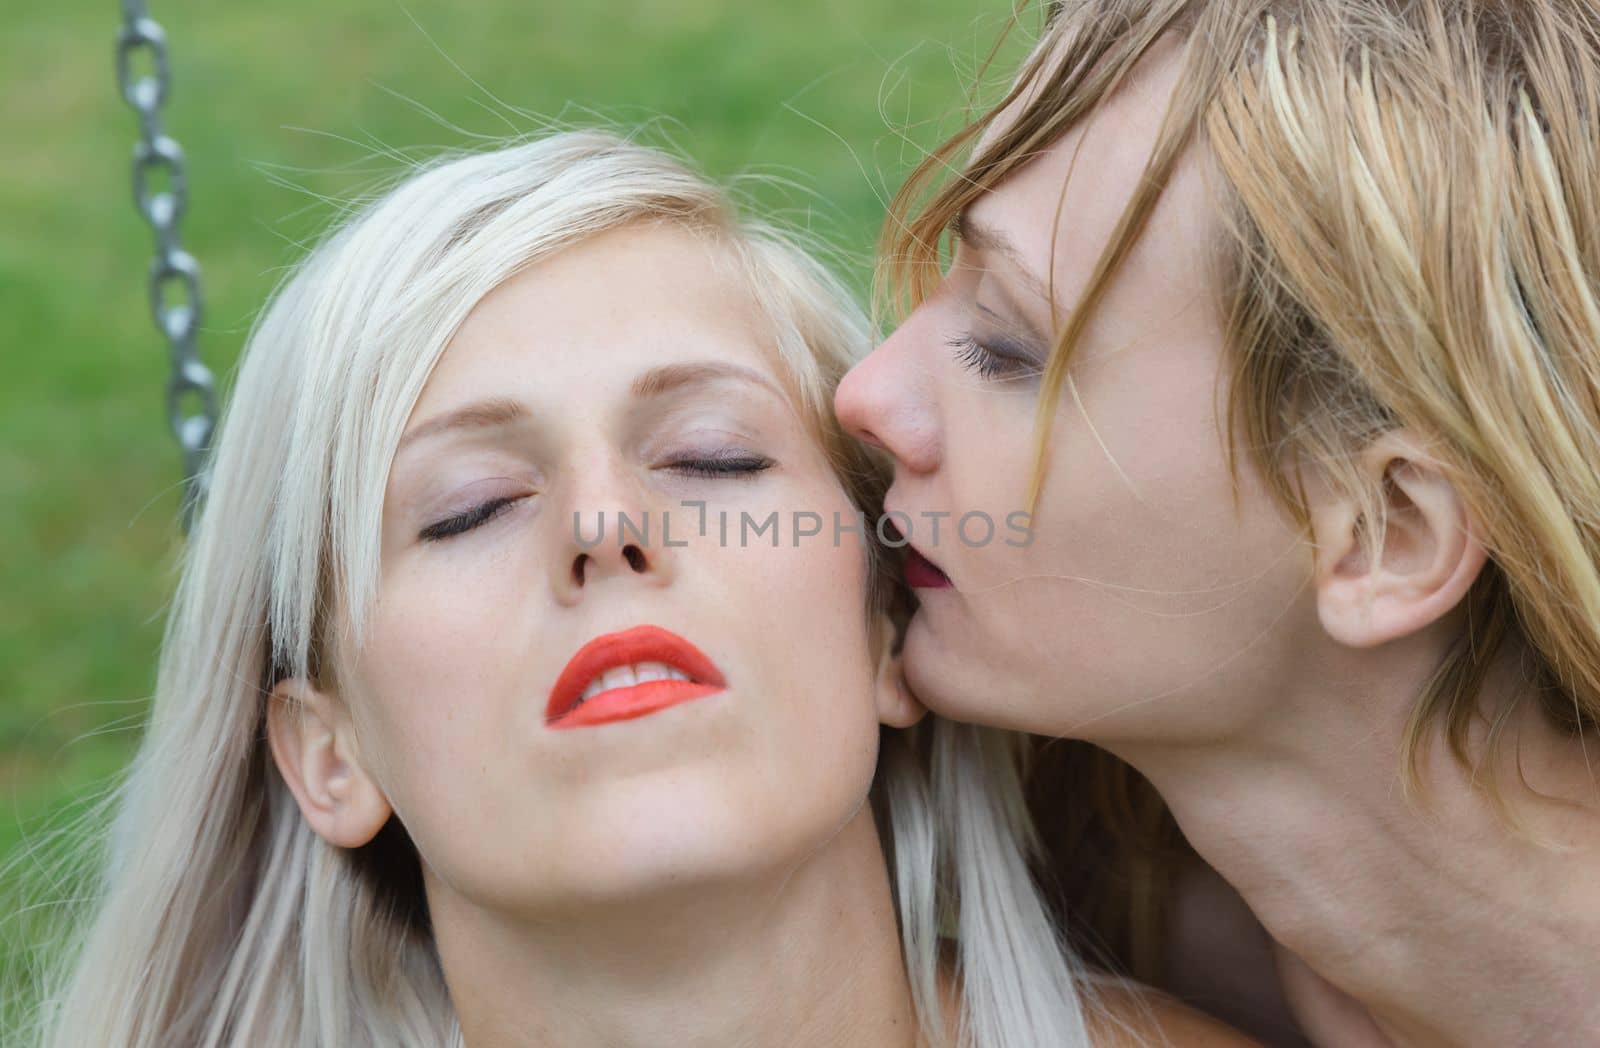 Romantic relationship between two young women. Love and passionate kiss. by palinchak